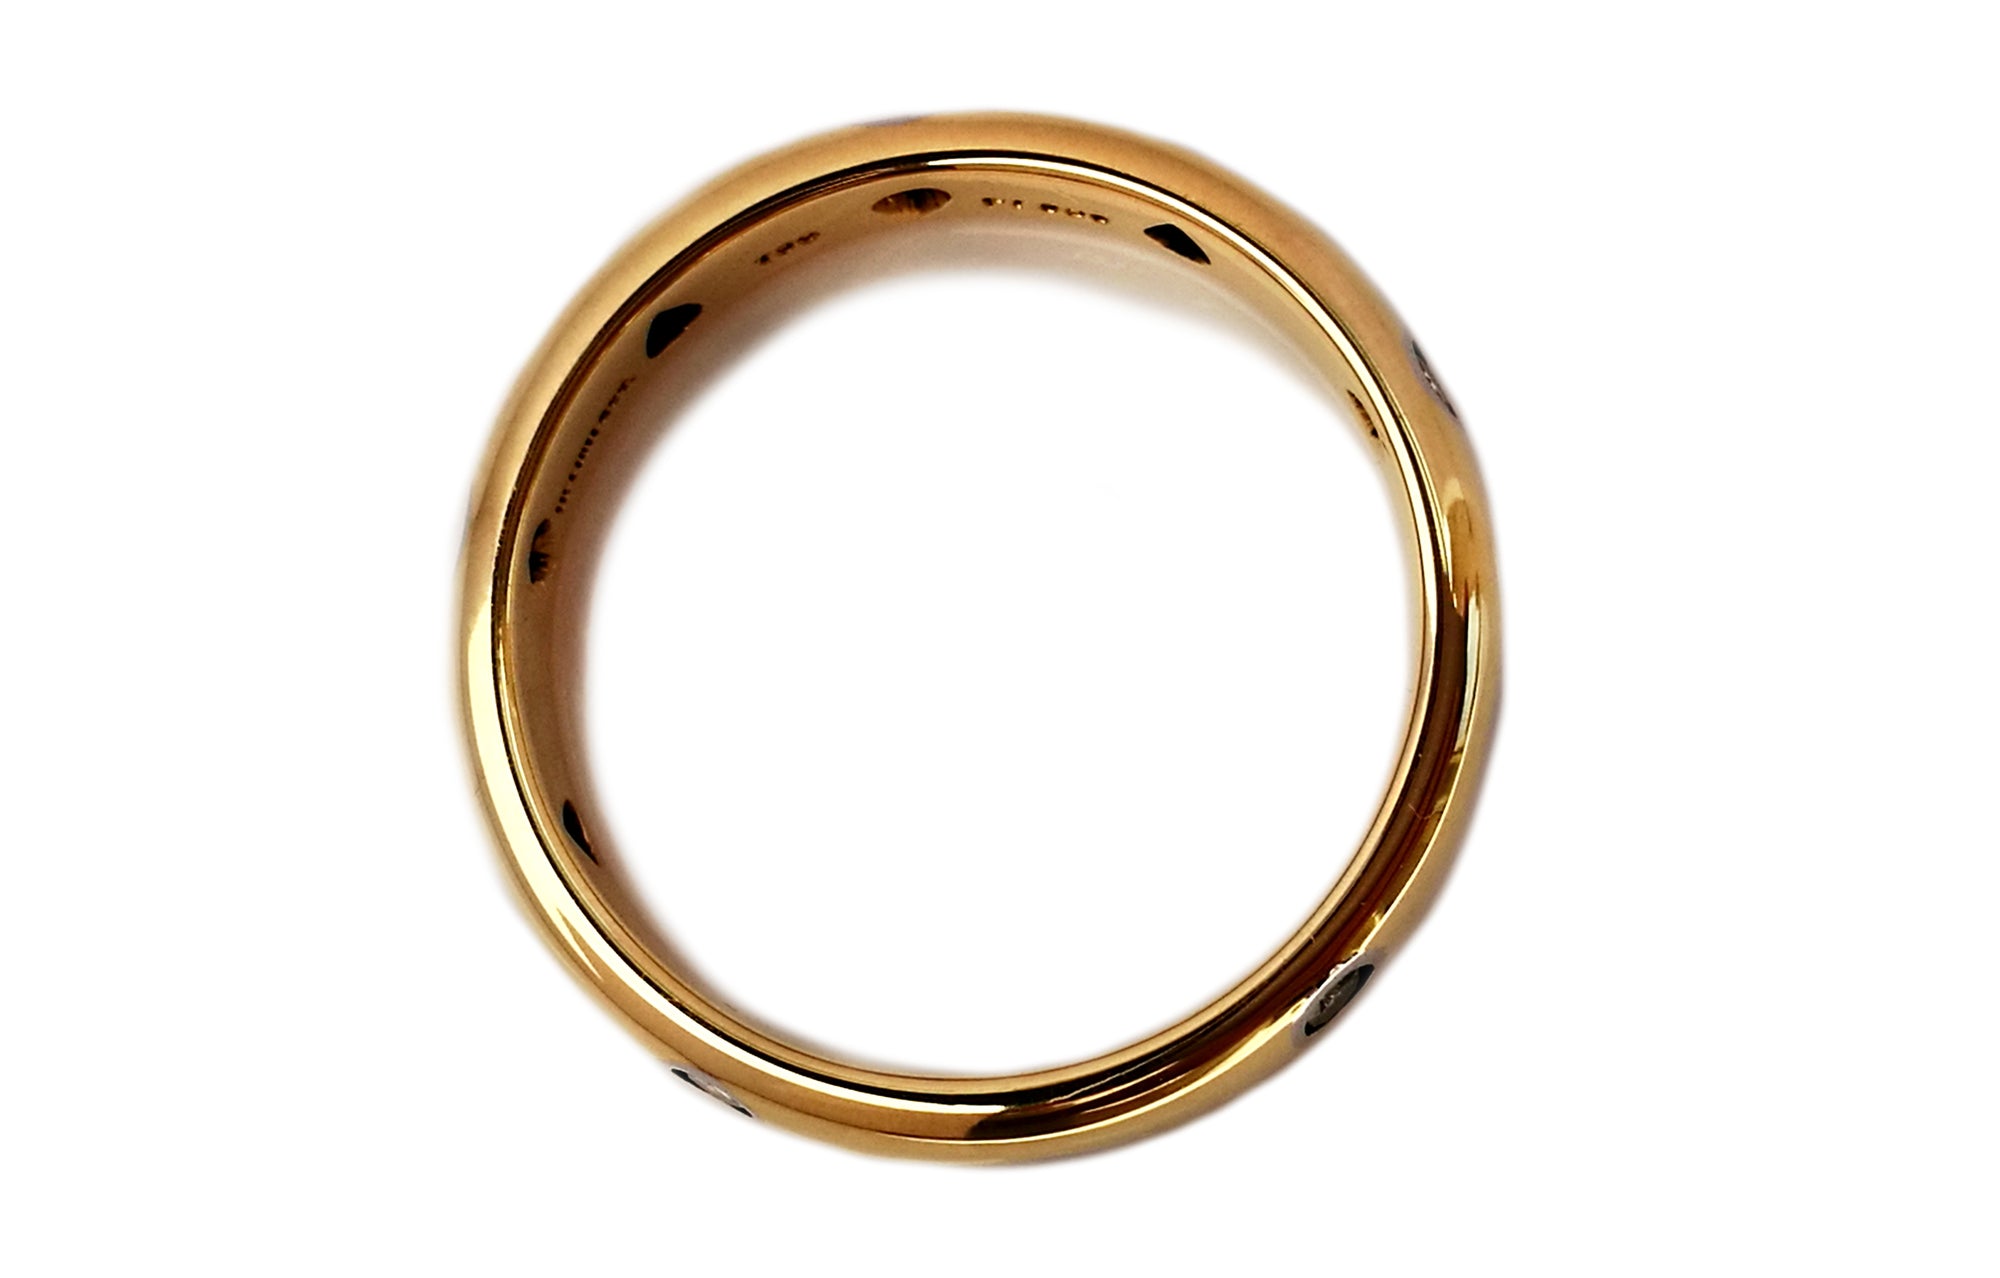 Tiffany & Co. Etoile Yellow Gold Ring, Size L